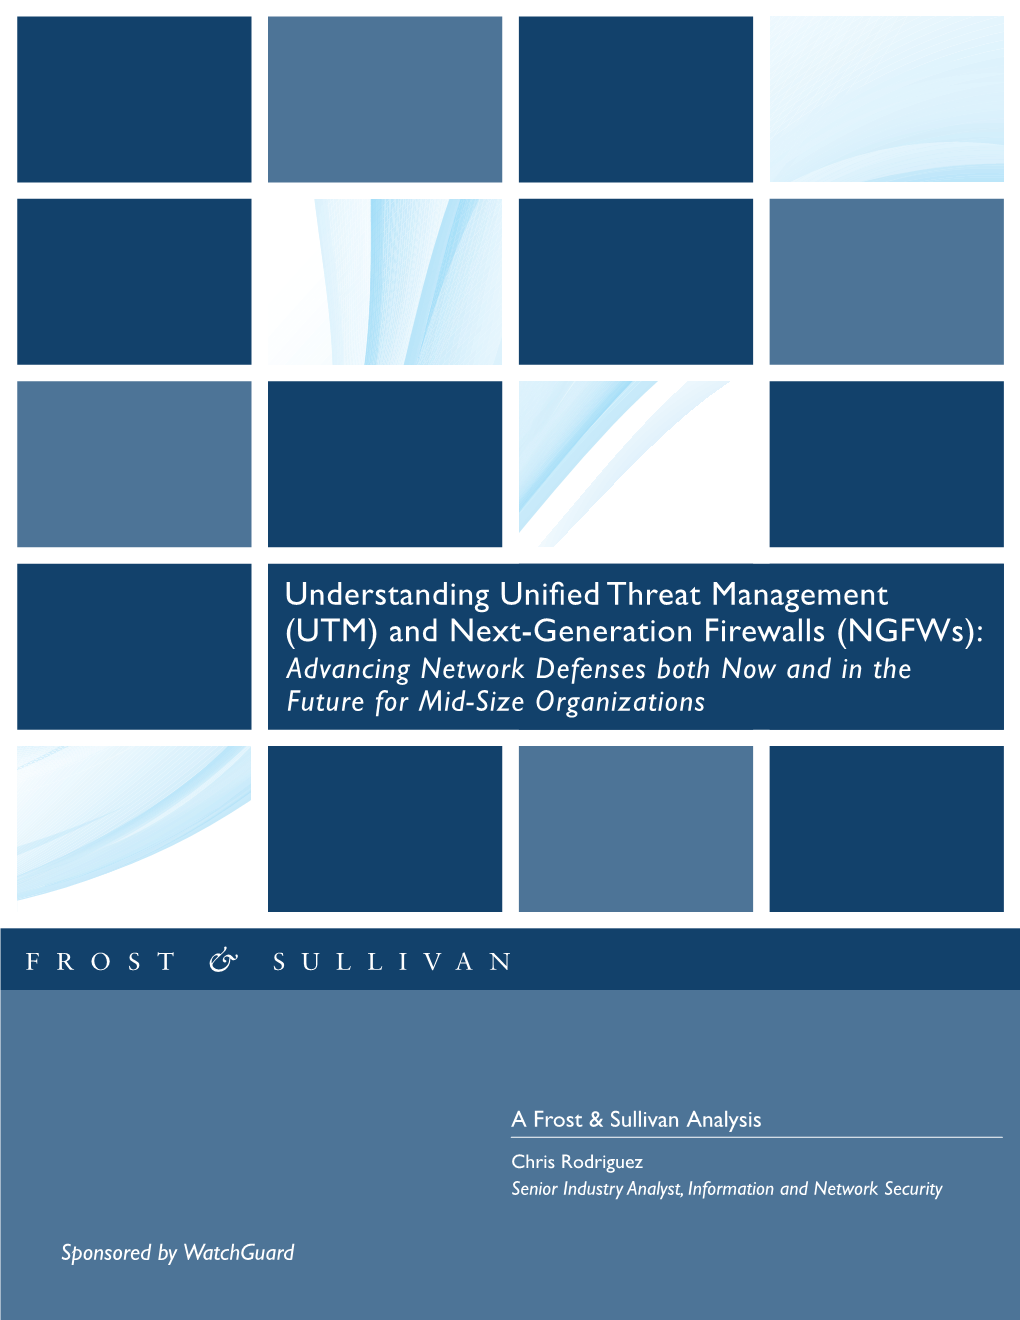 Understanding Unified Threat Management (UTM) and Next-Generation Firewalls (Ngfws): Advancing Network Defenses Both Now and in the Future for Mid-Size Organizations